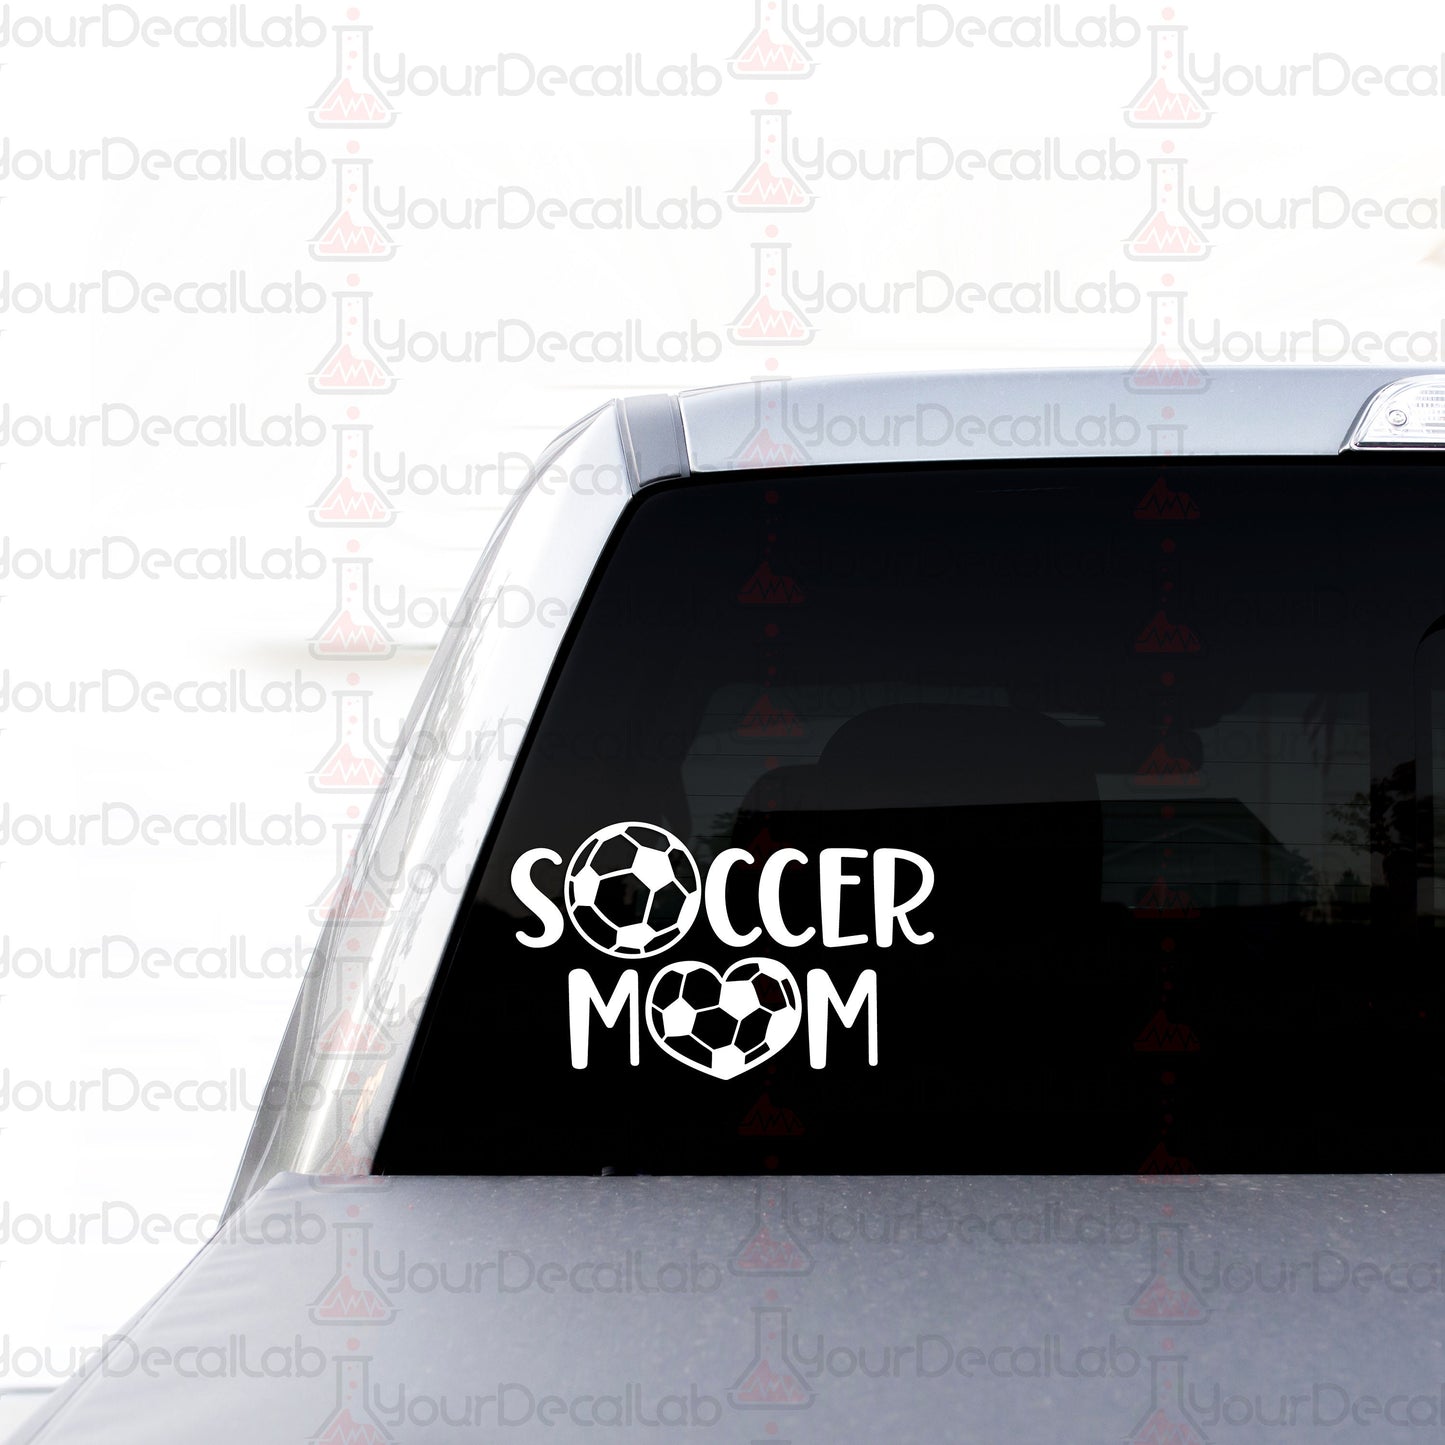 a soccer mom sticker on the back of a car